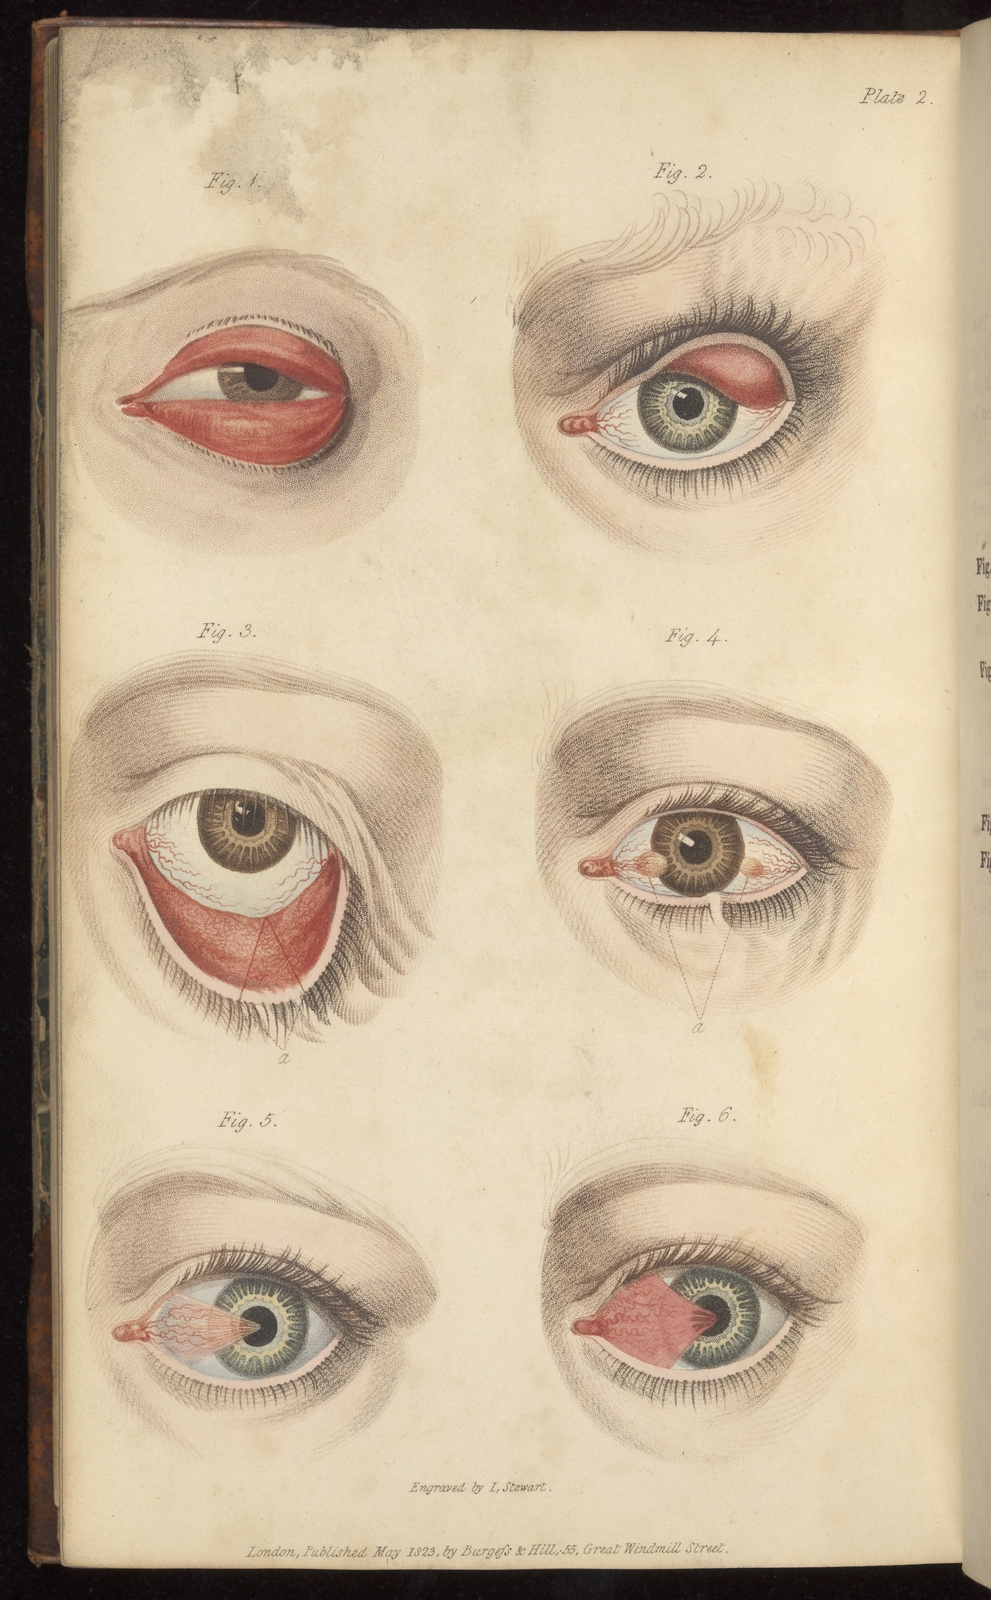 Colour engravings of eye problems such as muscles grown over eyeballs or turned inside out.